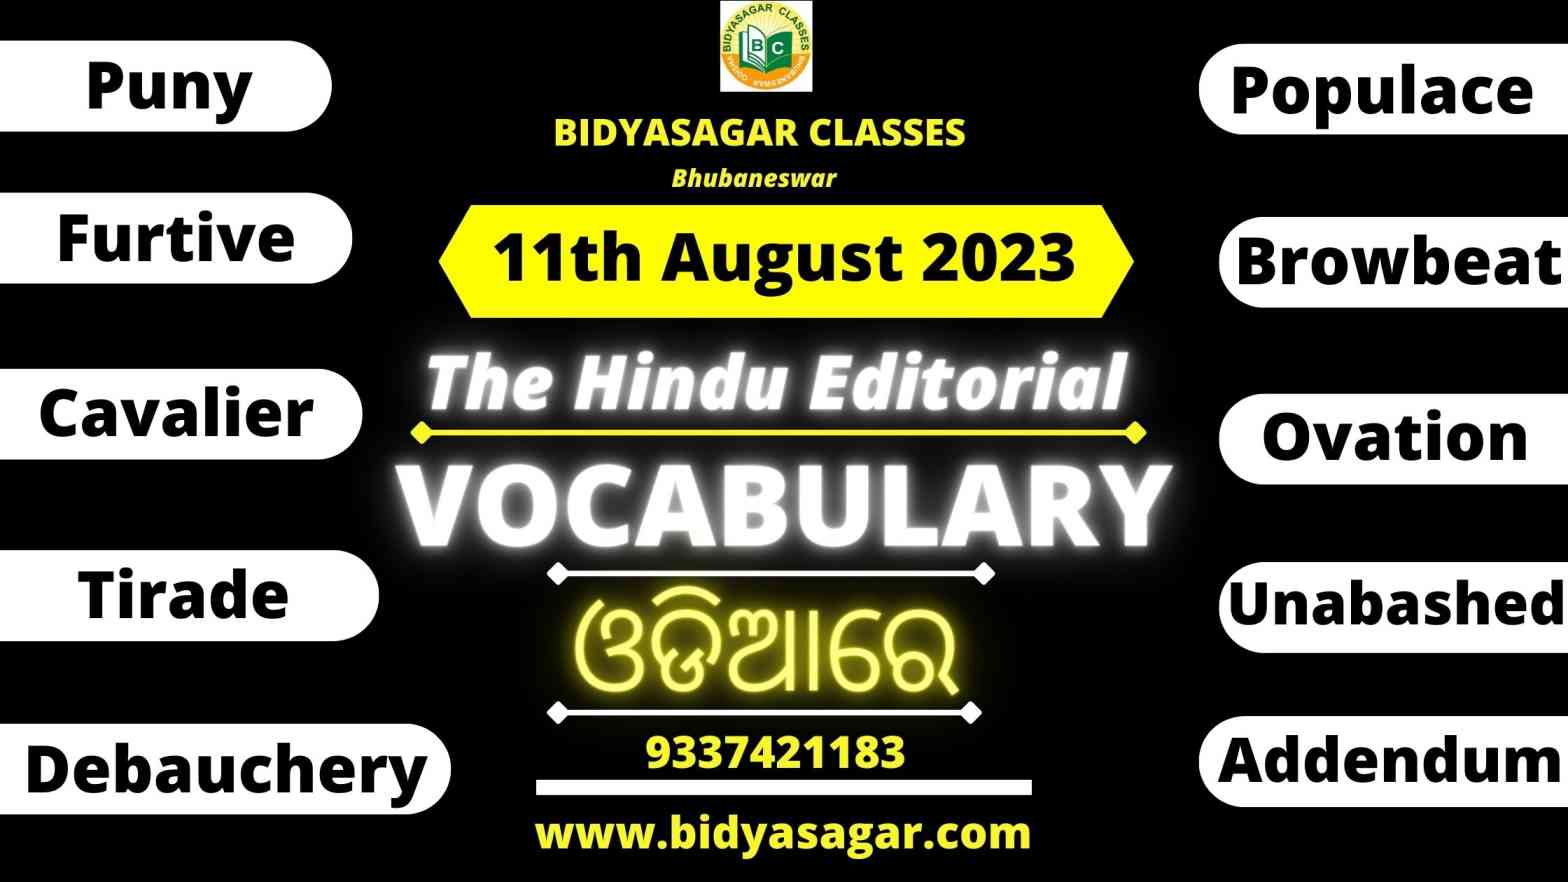 The Hindu Editorial Vocabulary of 11th August 2023